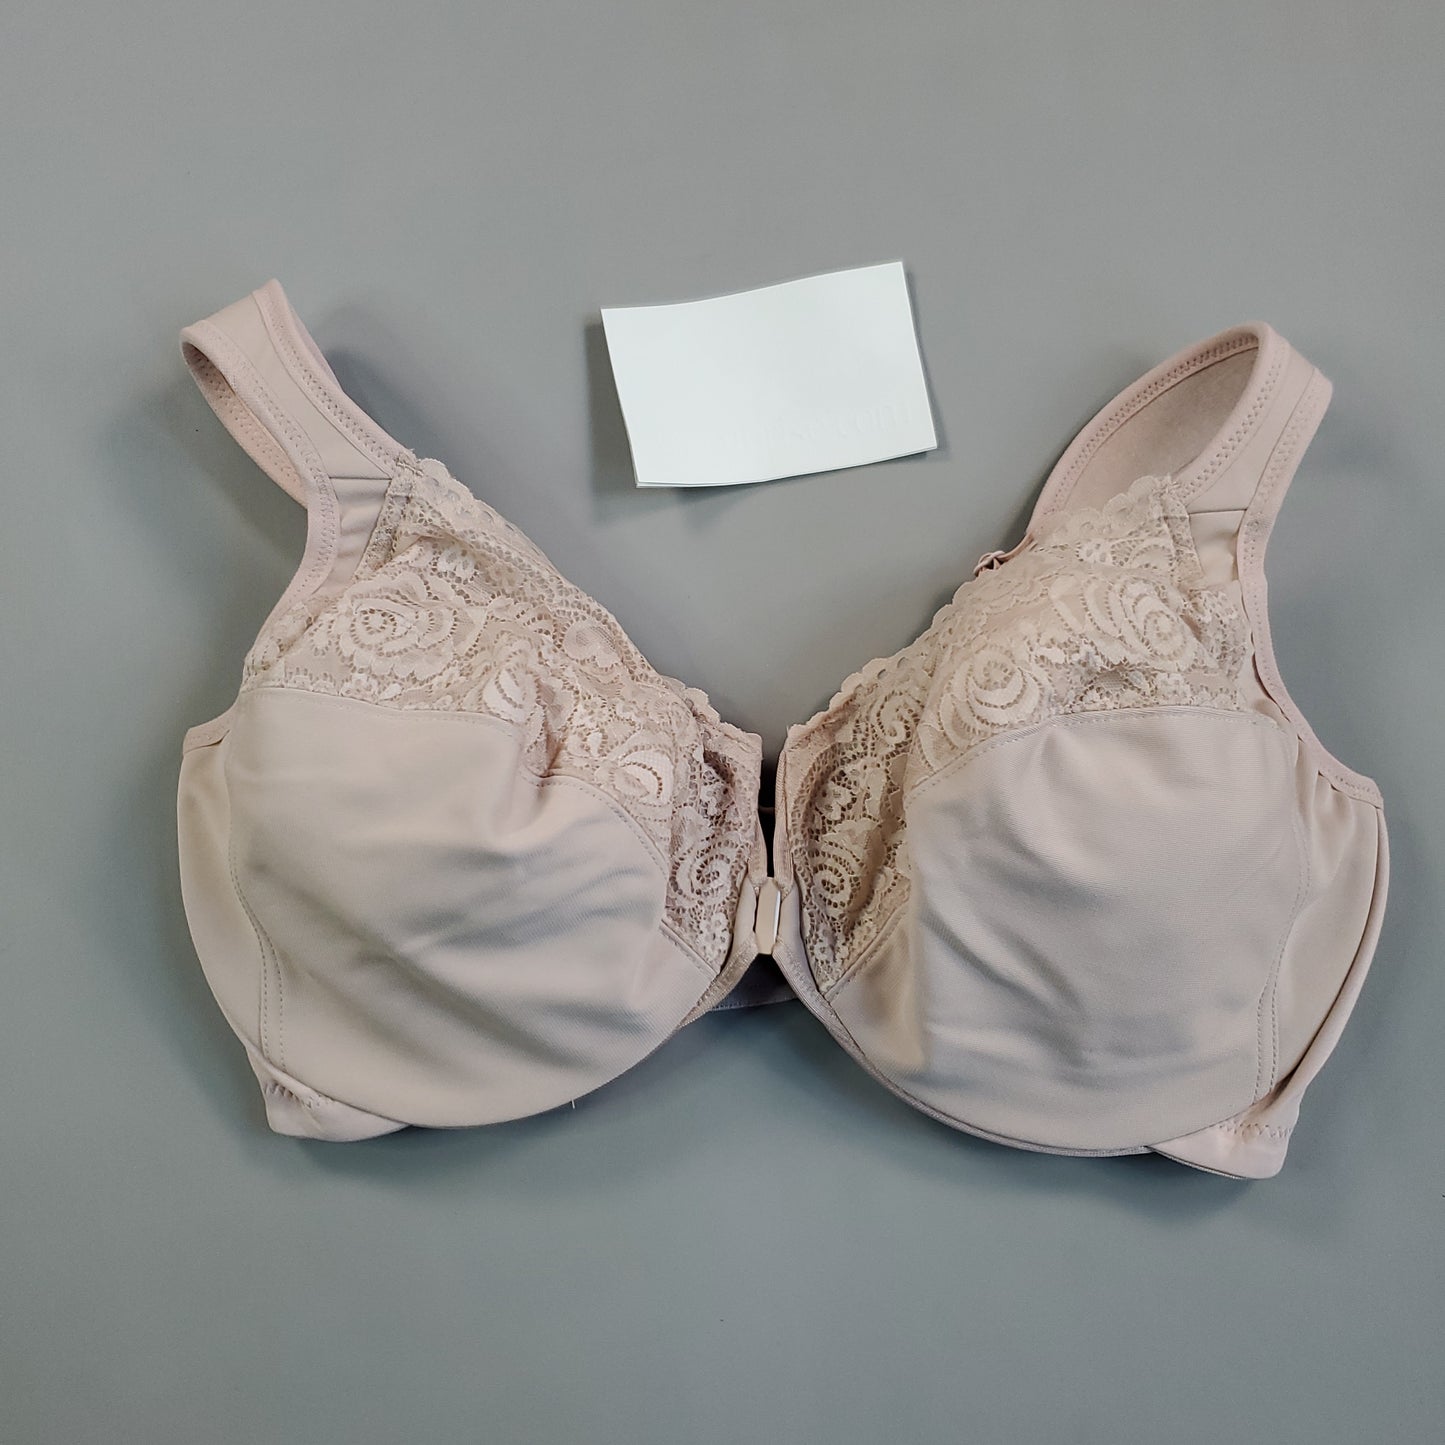 GLAMORISE Wire Support Bra Women's Sz 40 DD Nude Color (New Other)